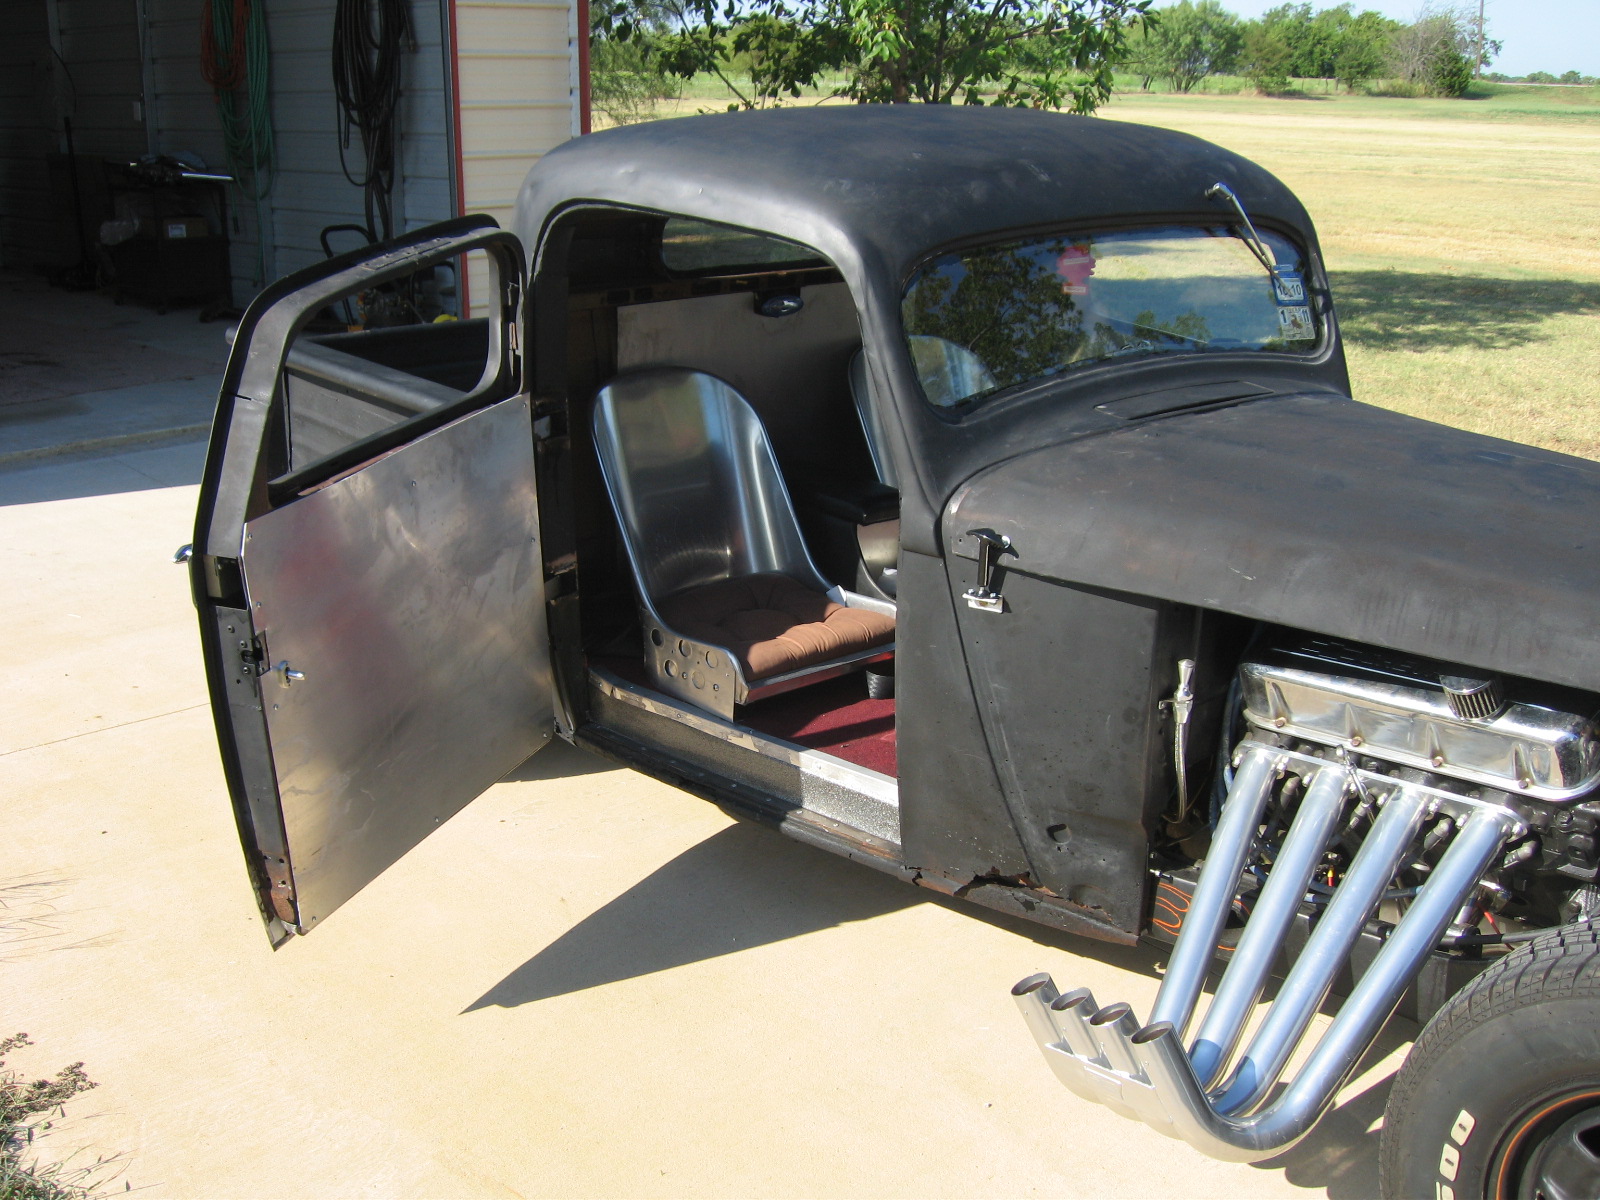 Here is my 36 Dodge rat rod with a BB 454 Chevy engine  with my new